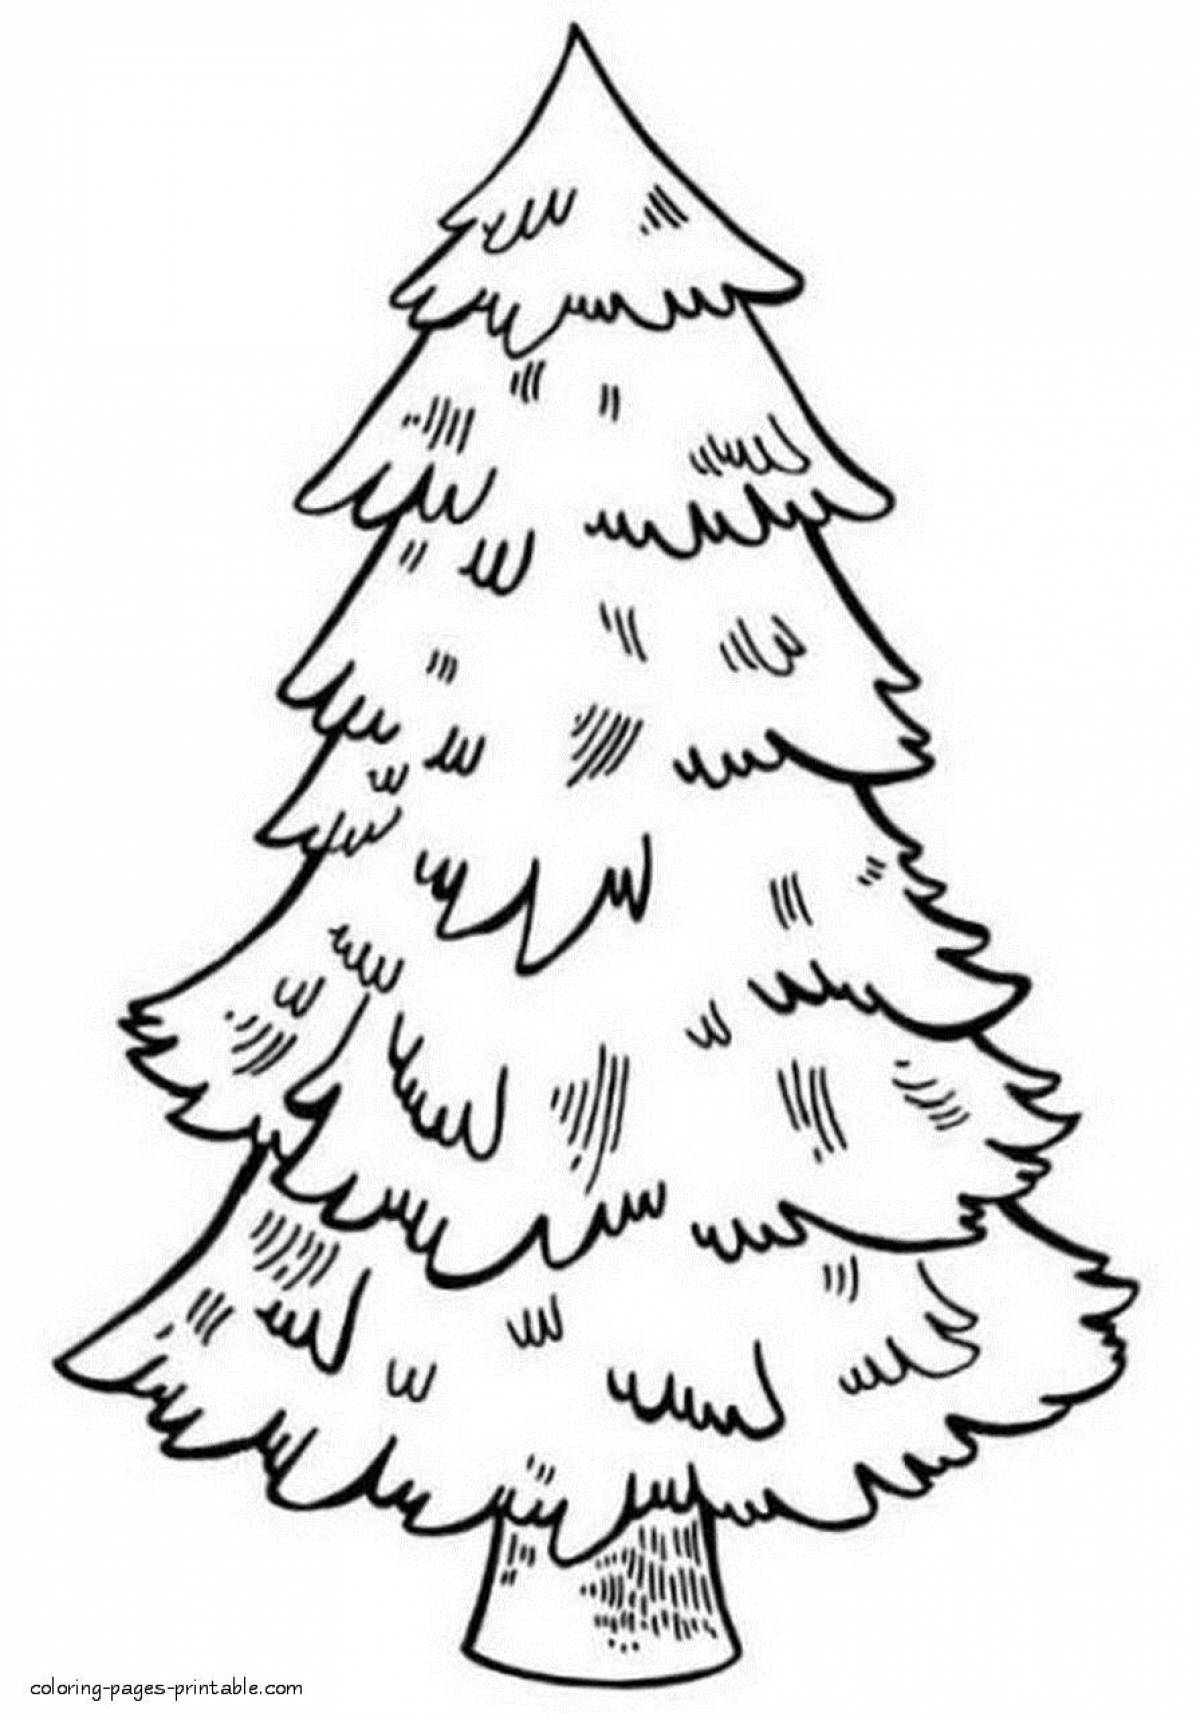 Glamourous Christmas tree coloring book for children 3-4 years old